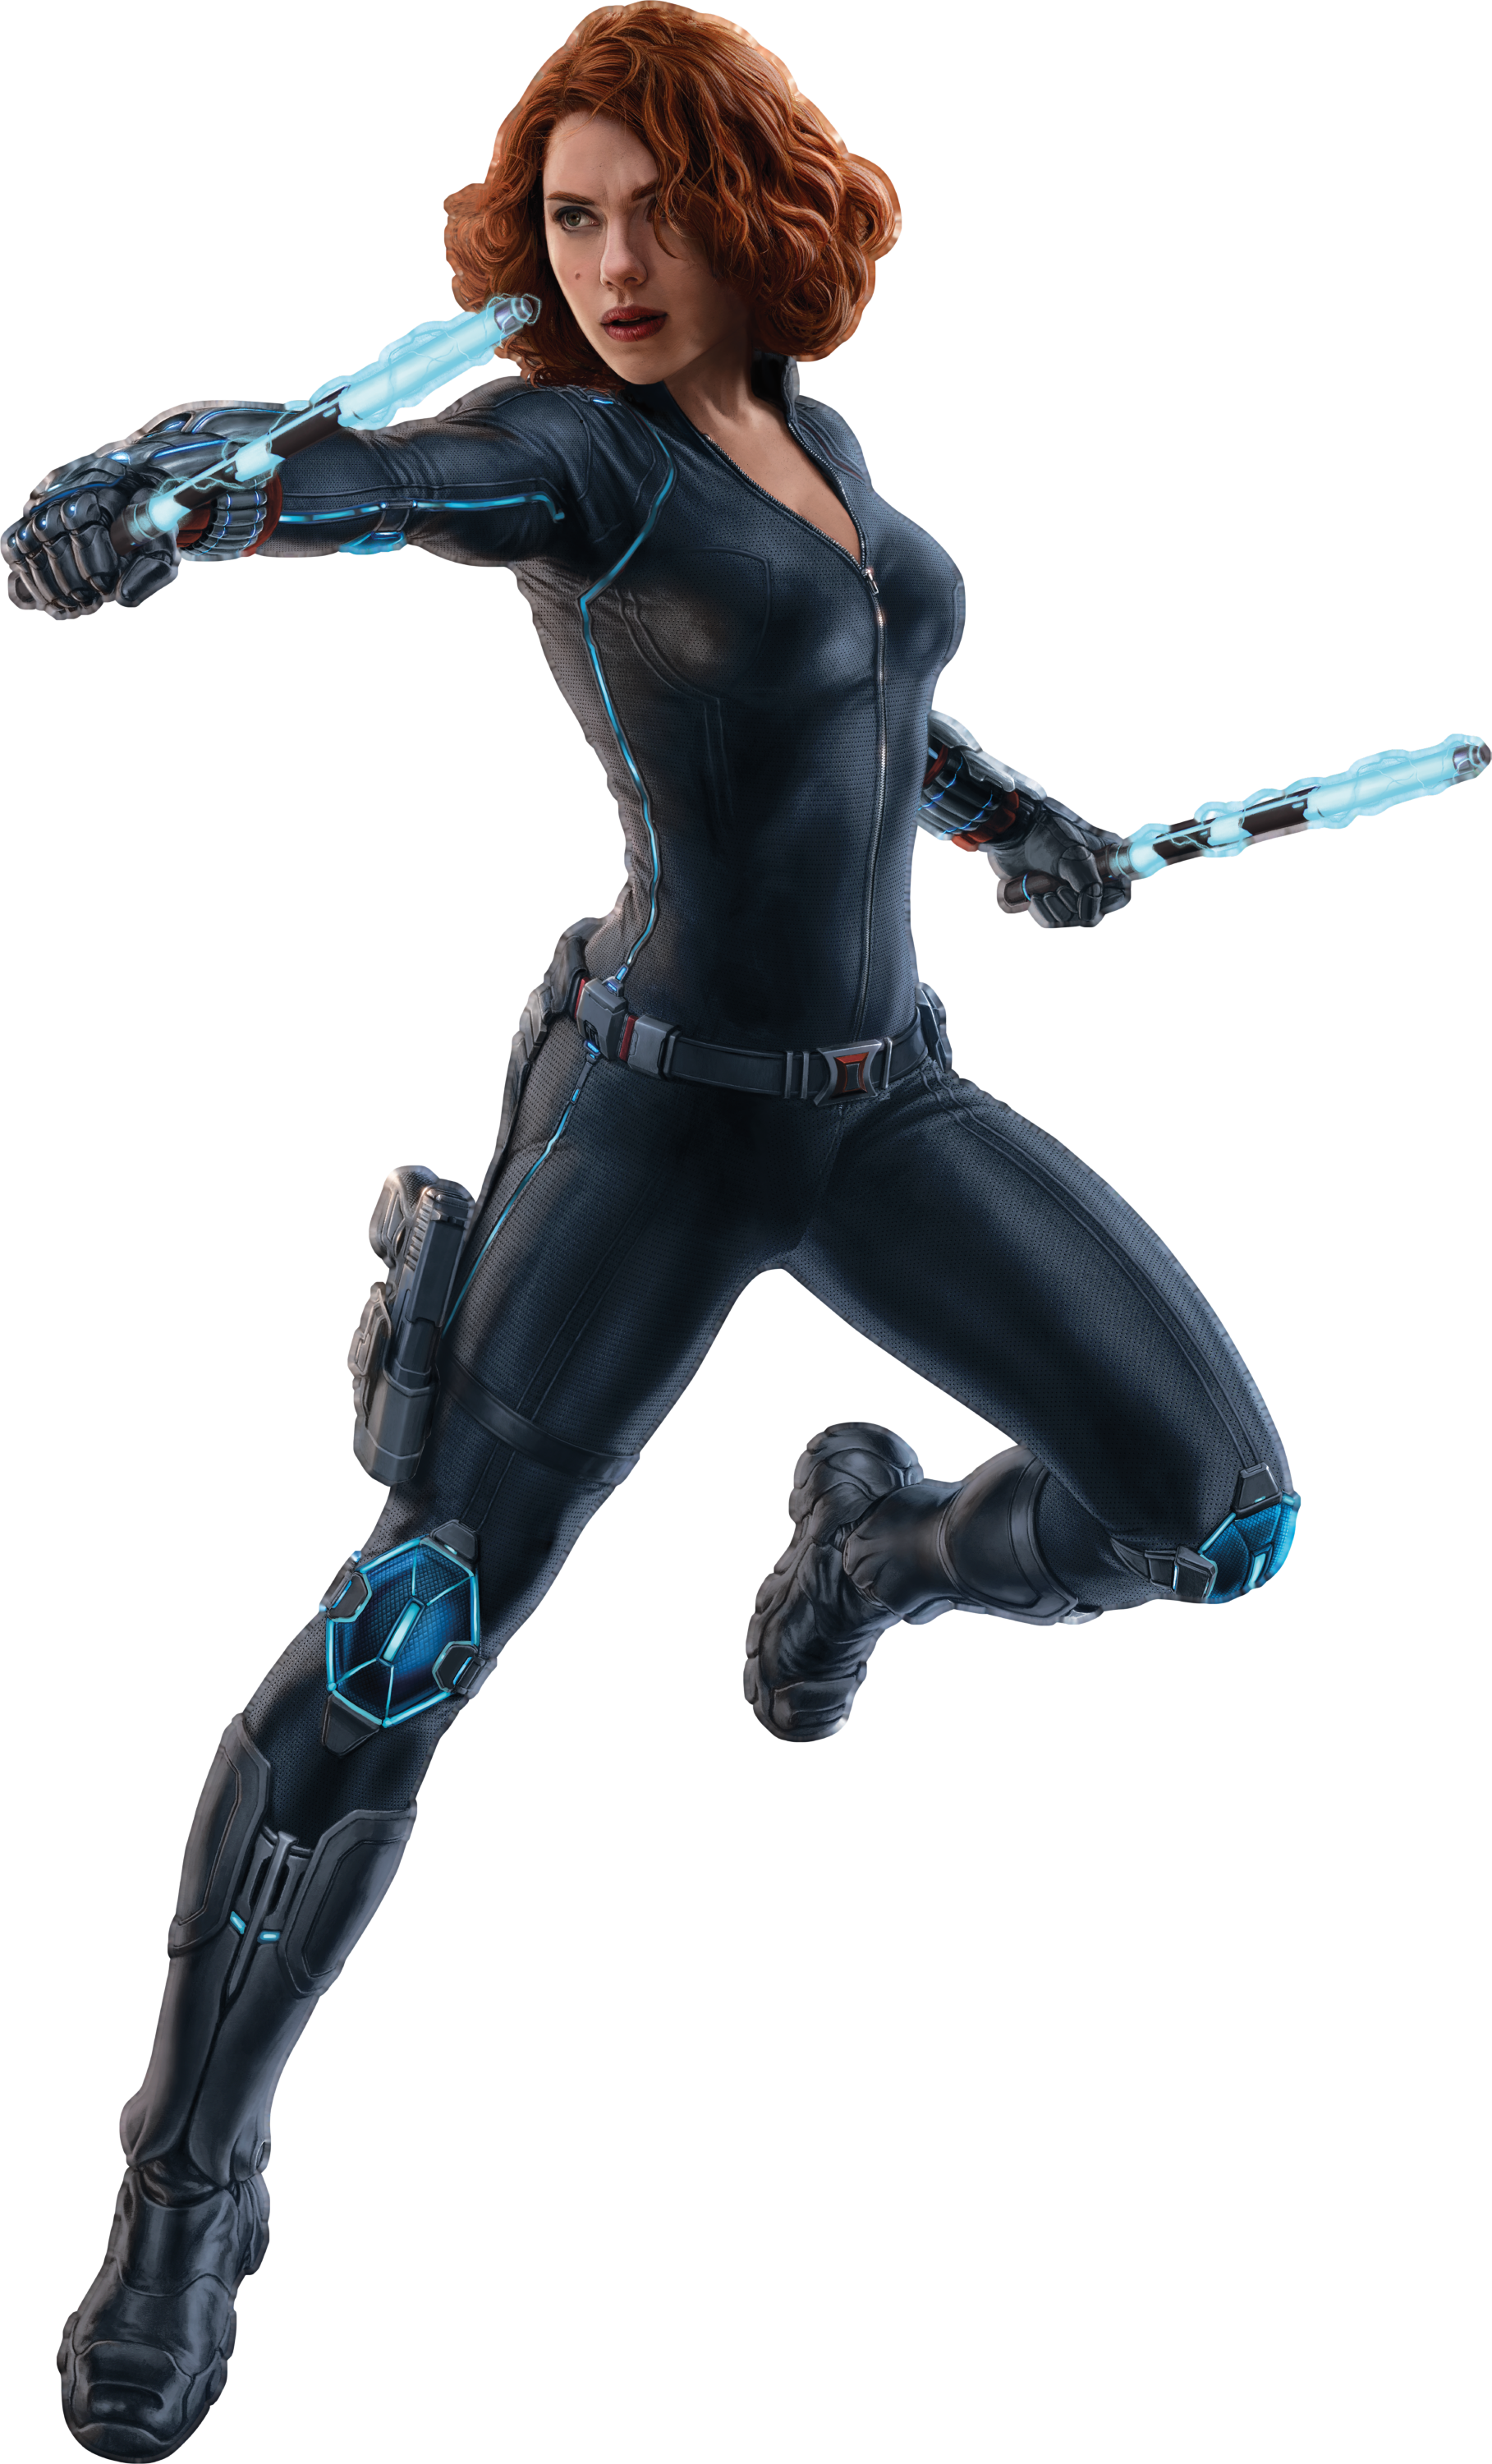 Image   Black Widow Aou Render.png | Marvel Cinematic Universe Wiki | Fandom Powered By Wikia - Black Widow, Transparent background PNG HD thumbnail